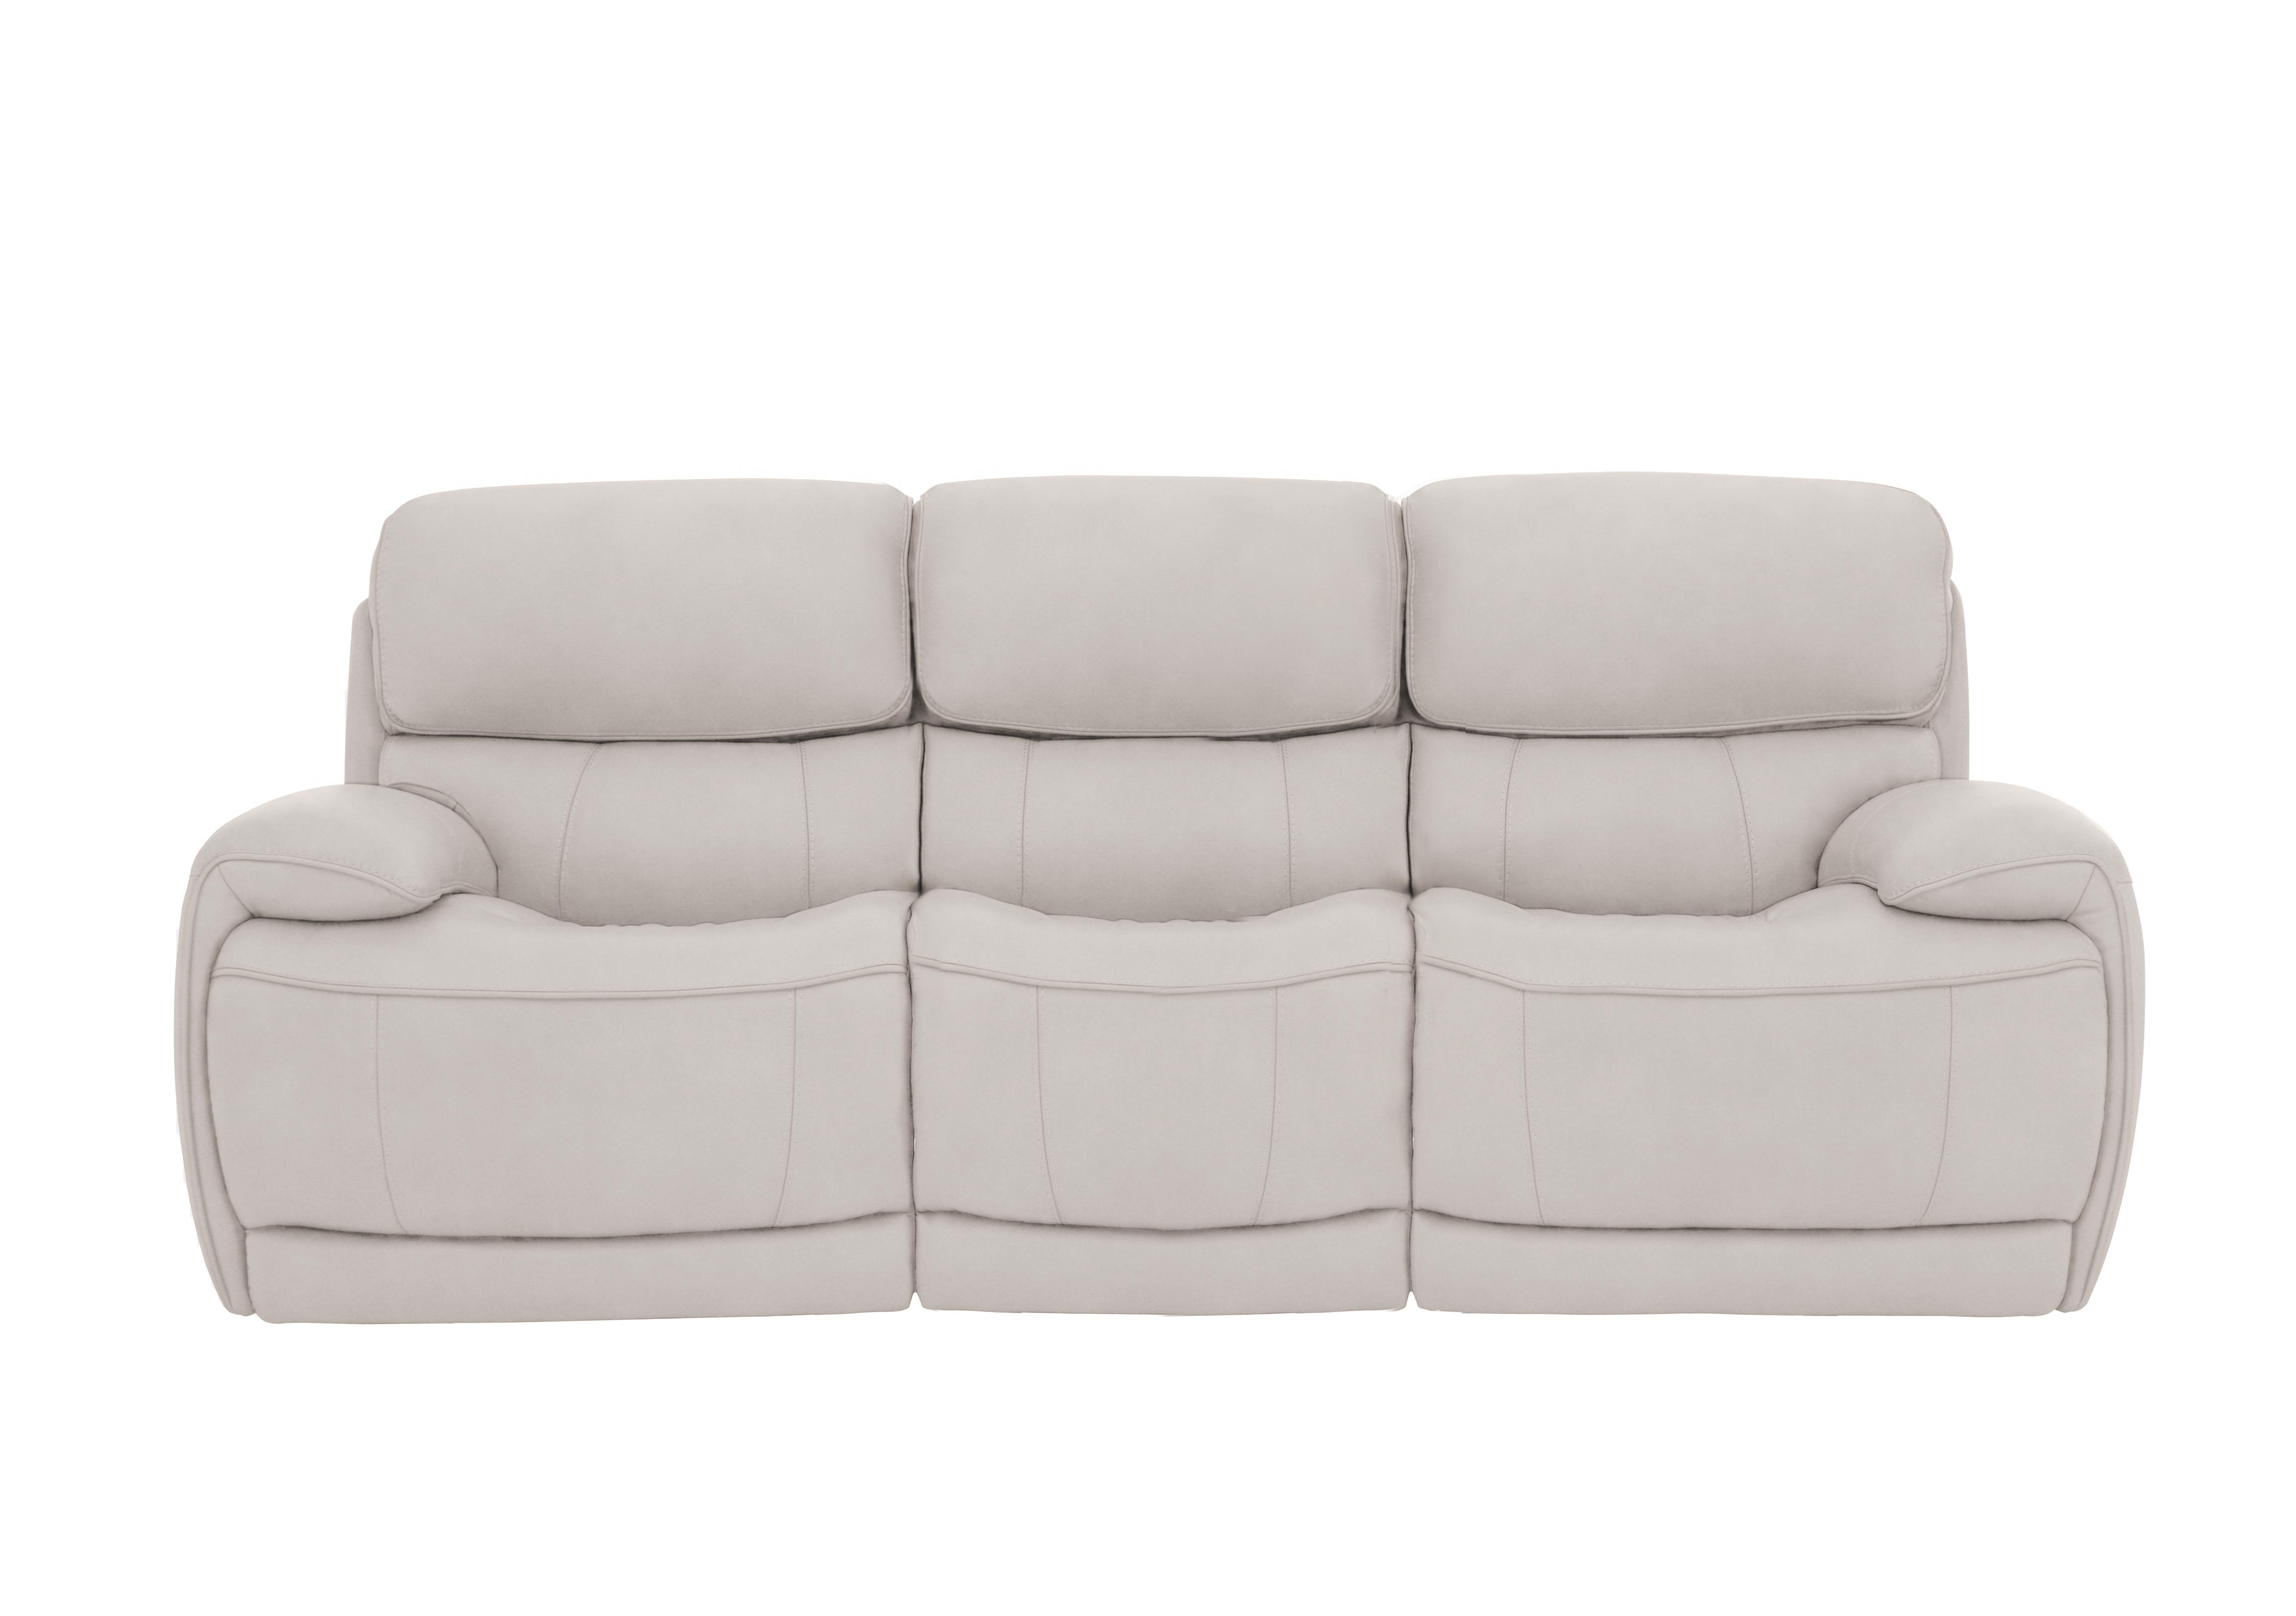 Rocco 3 Seater Fabric Power Rocker Sofa with Power Headrests in Bfa-Mad-R02 Feather on Furniture Village